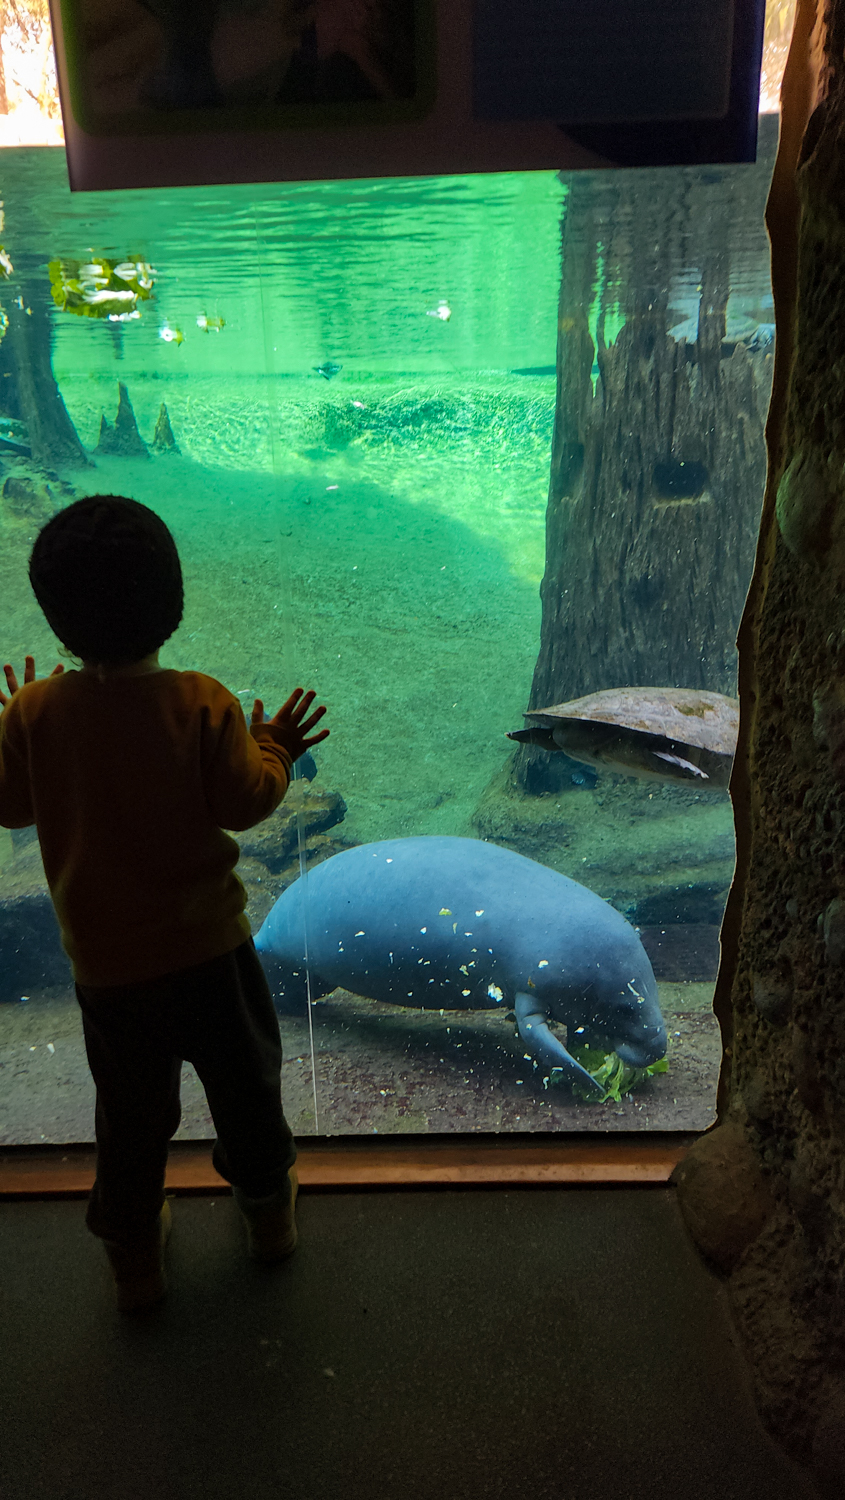 We loved seeing the manatees at the Tampa Zoo